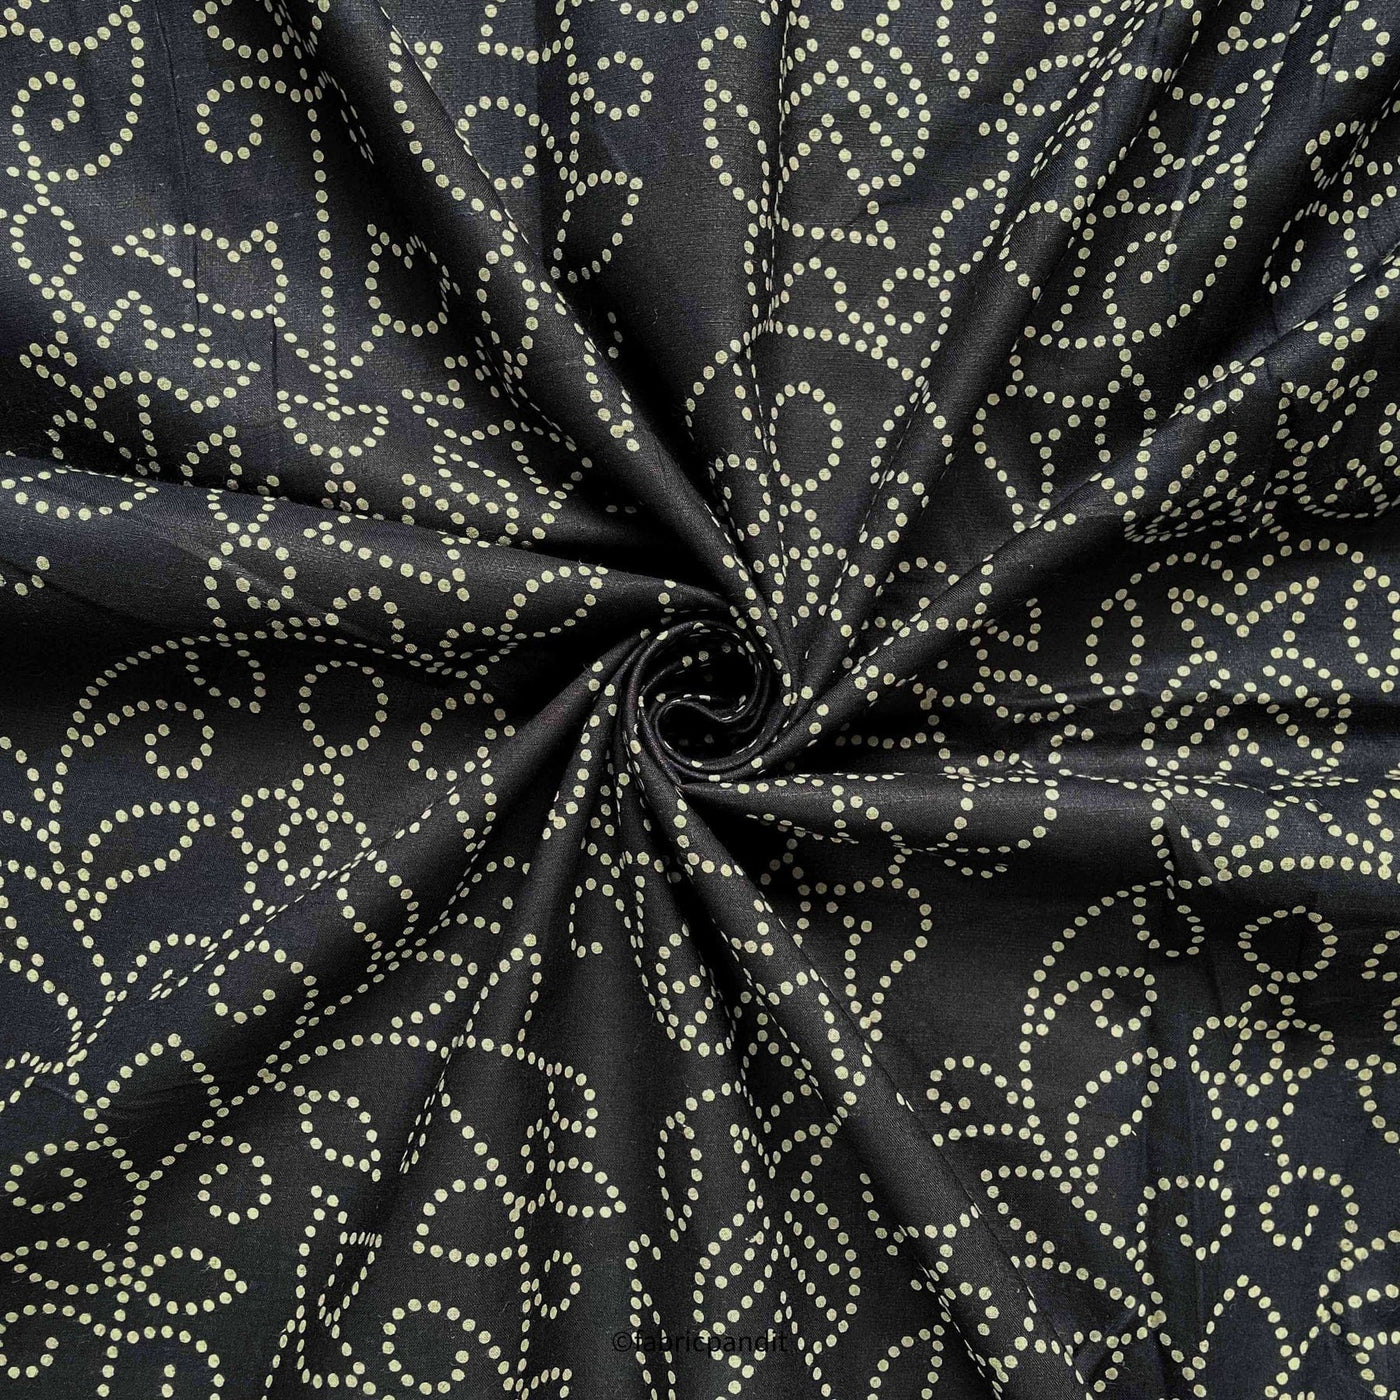 Fabric Pandit Fabric Black & Beige Traditional Bandhani Pattern Floral Jaal Hand Block Printed Pure Cotton Fabric (Width 42 inches)